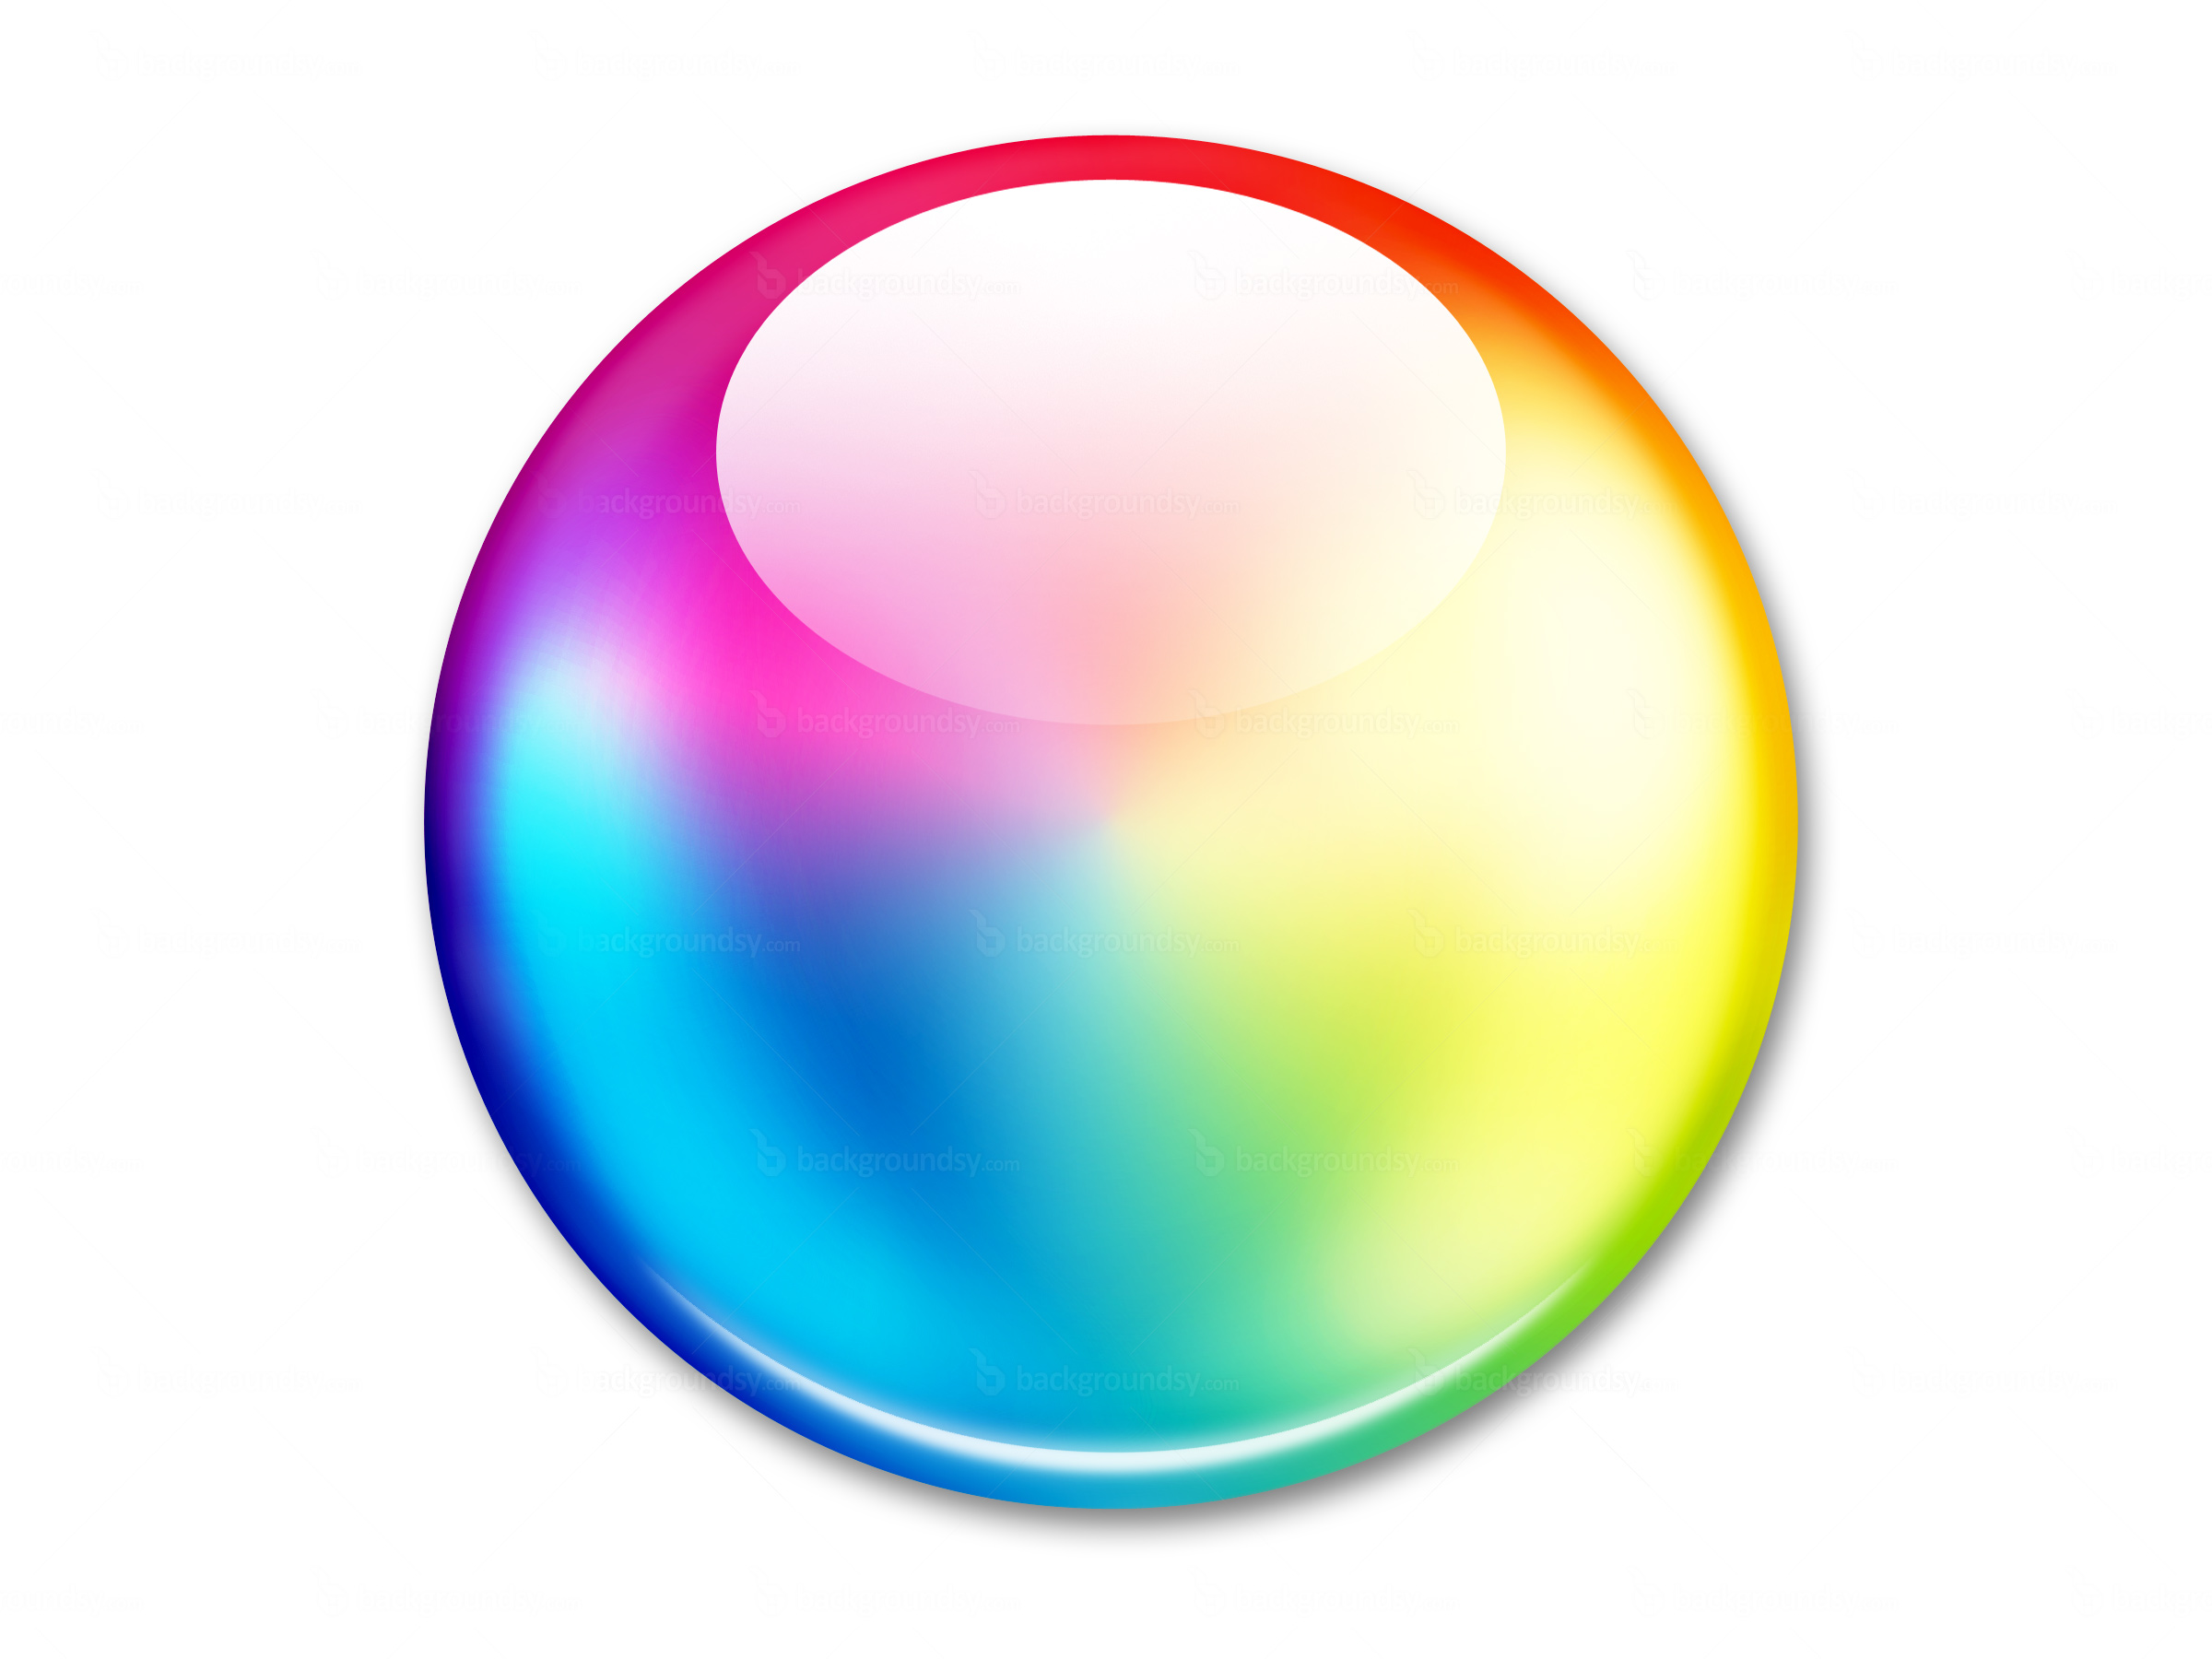 Spirituality peace and love - colorful icon Vector Image